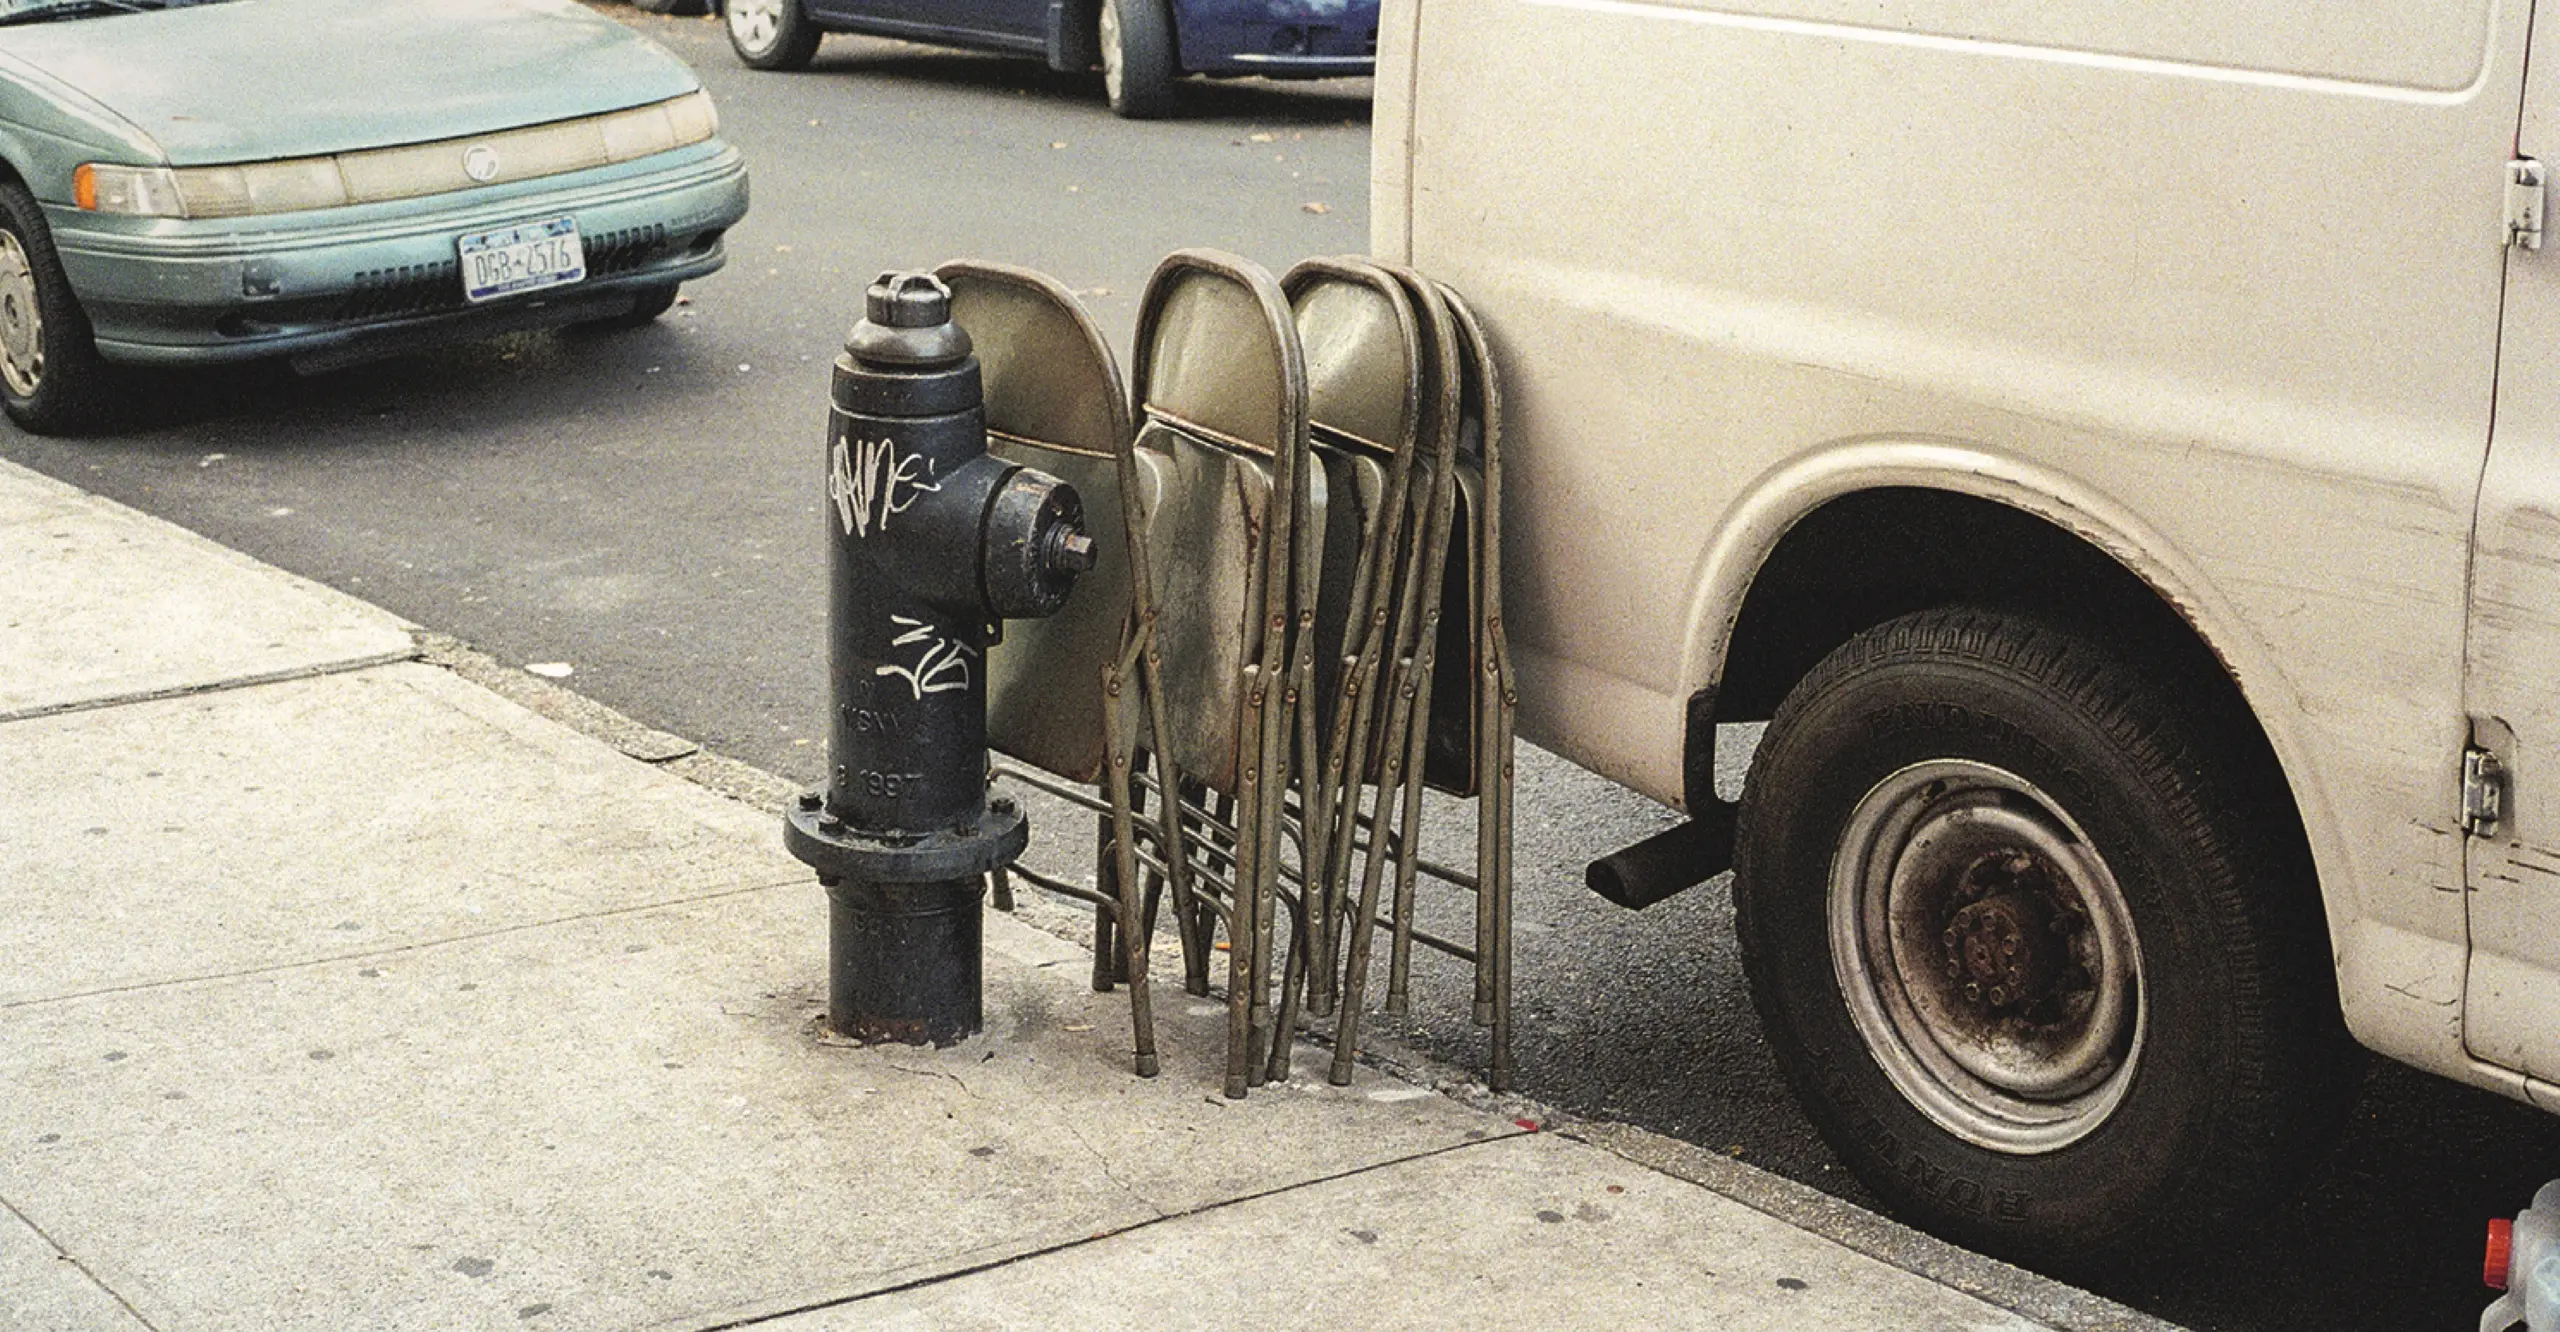 Street scene showing  a black fire hydrant and green chairs leaning a against a parked white van